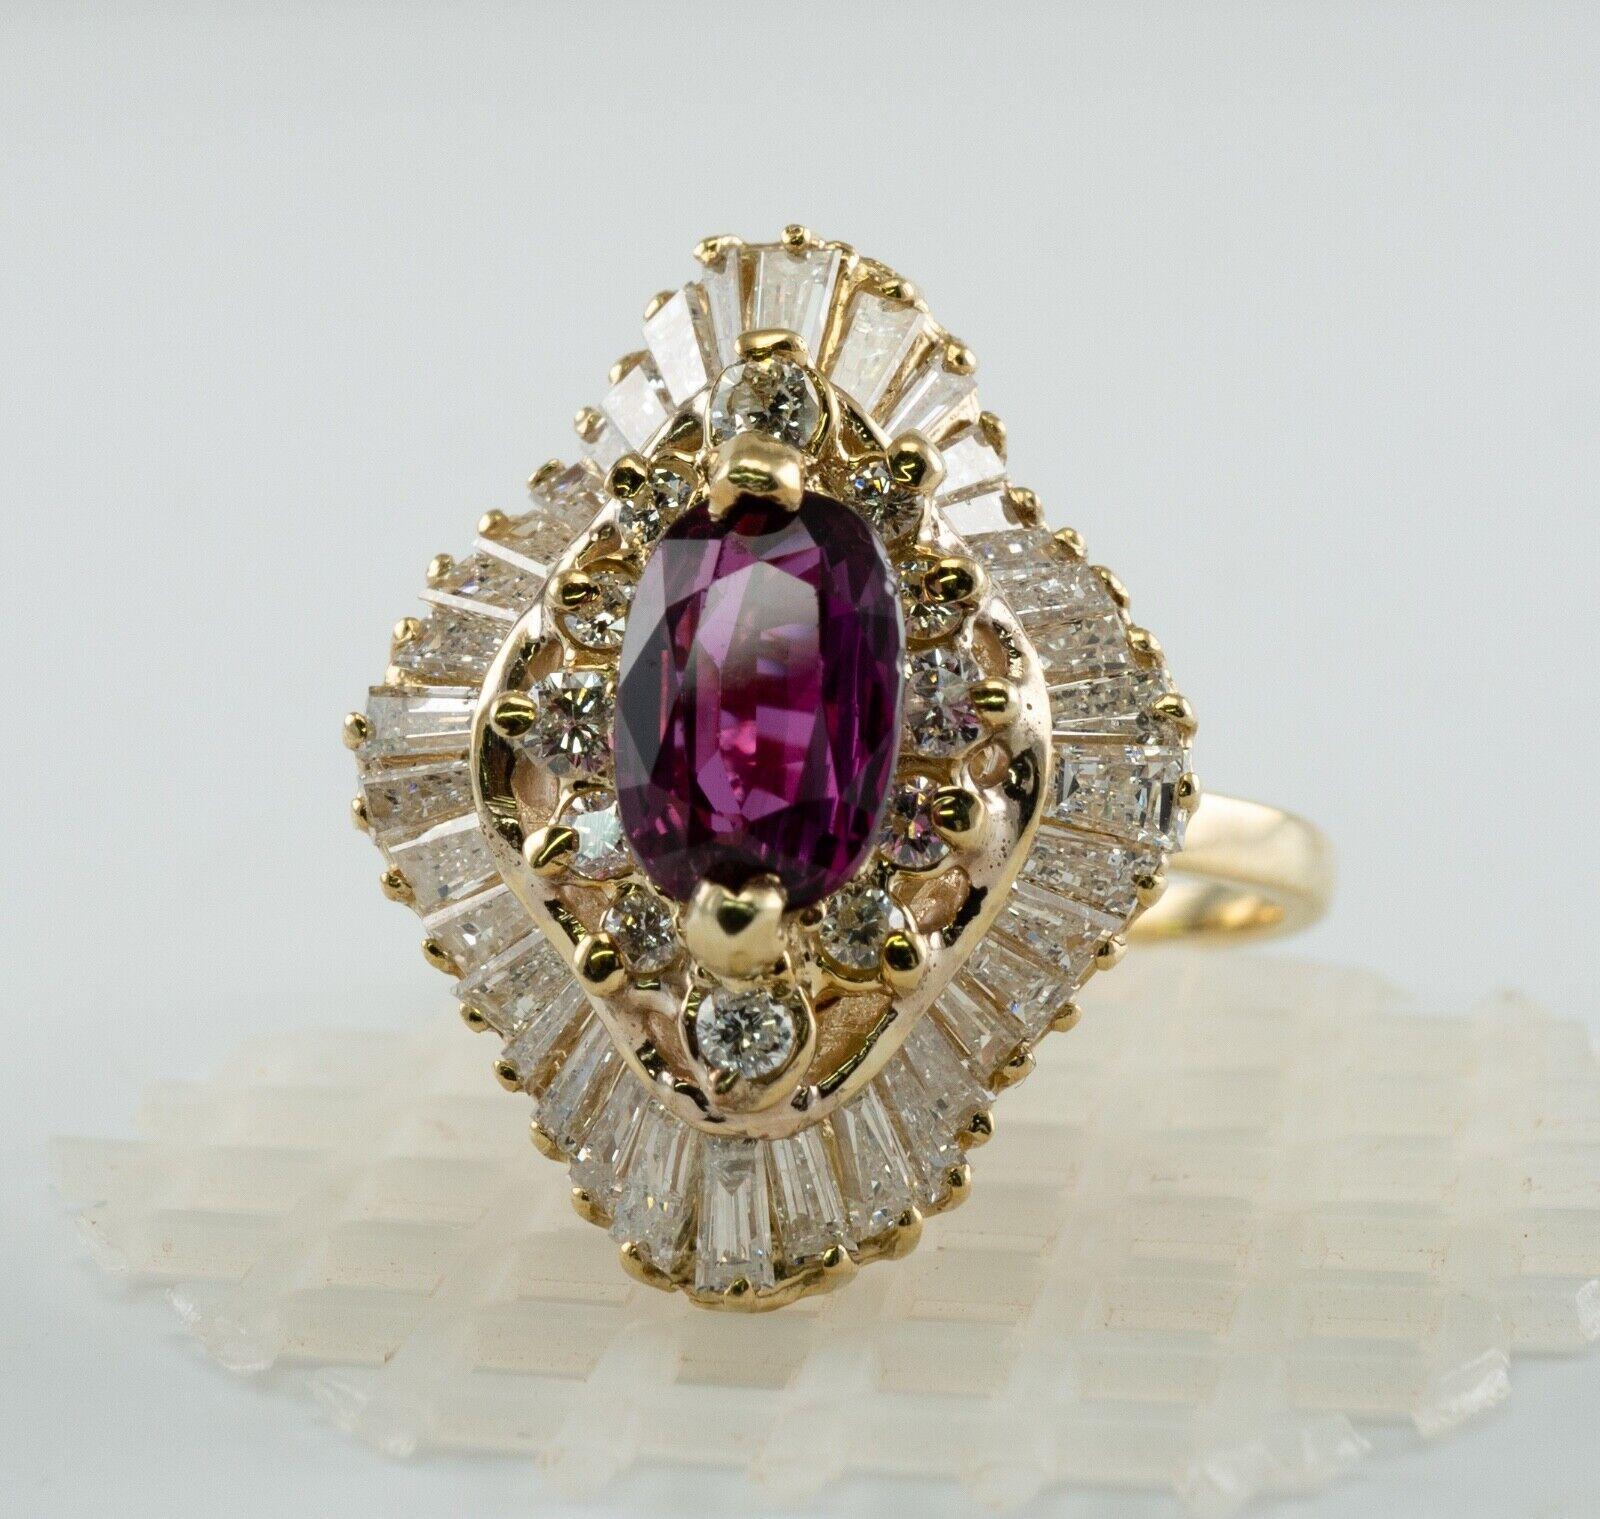 This estate ring is made in solid 14K Yellow Gold.
The center natural Earth mined Rubellite measures 8x6mm (1.18 carats).
This is a very clean gem with great intensity. It has a minor chip on the corner that cannot be noticed or seen without knowing